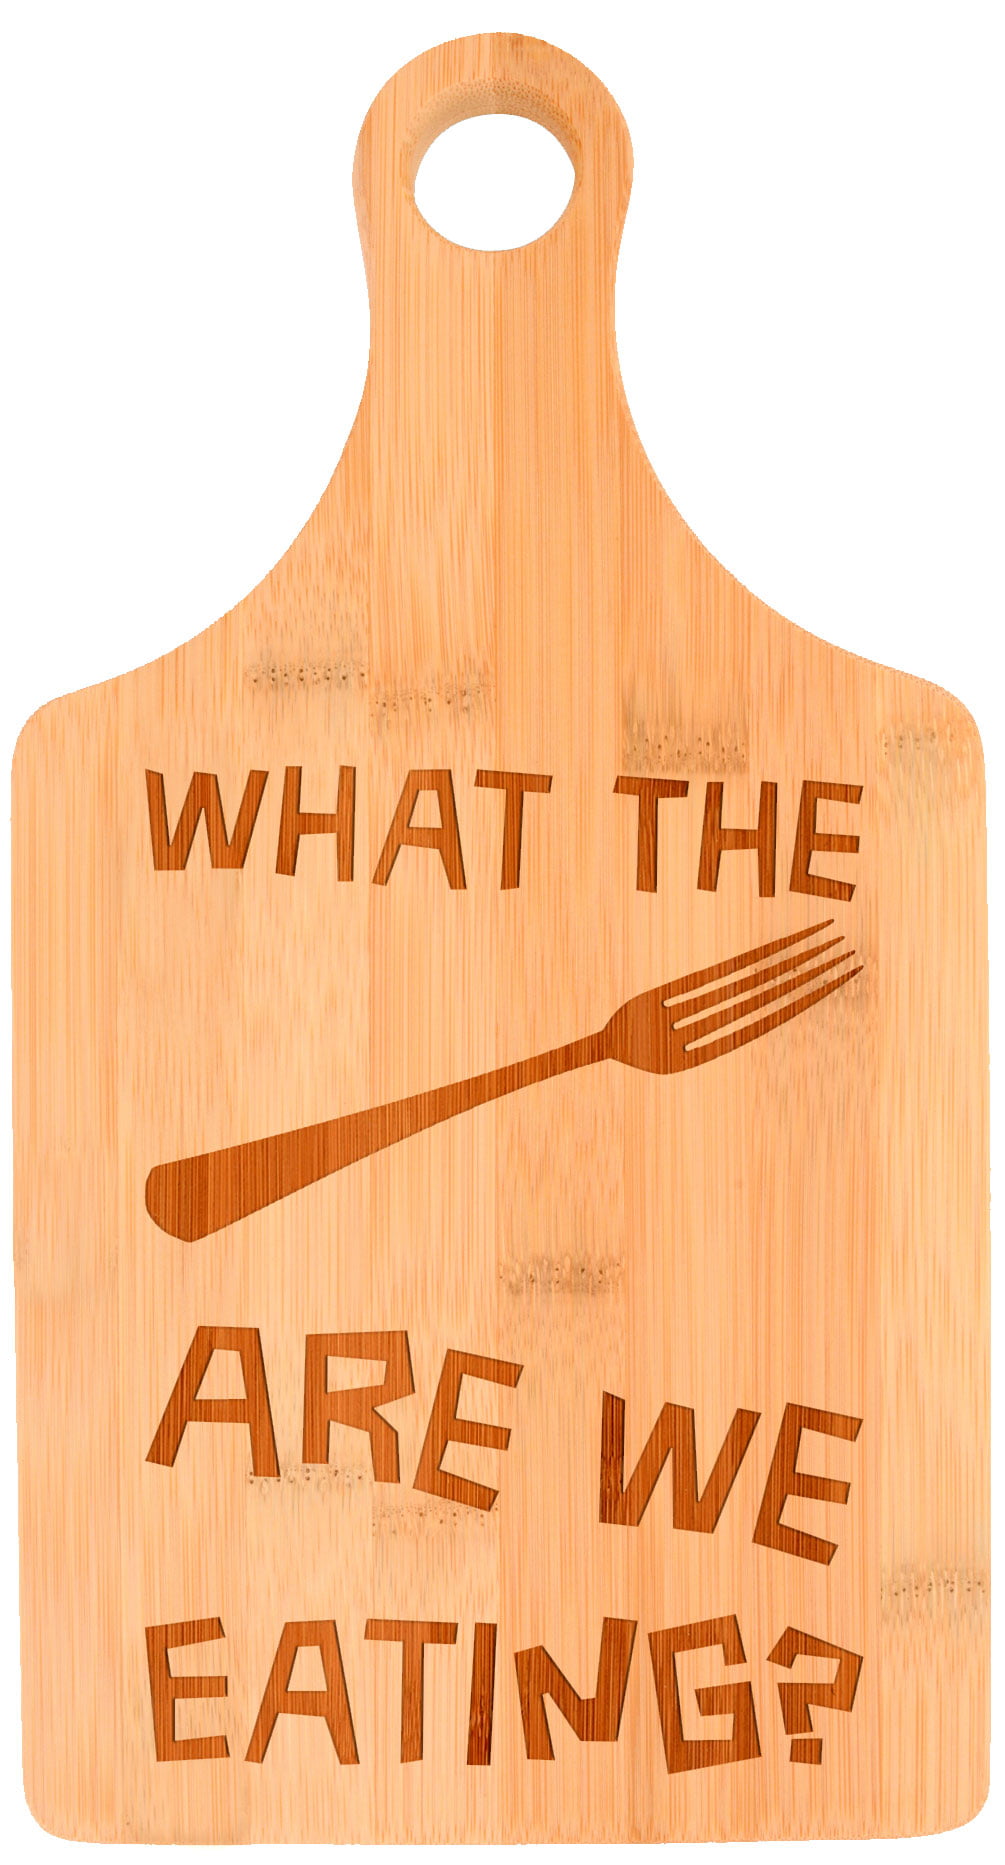 Funny What The Fork Is For Dinner Chopping Board Kitchen Decor Gift Fo –  Lady Laser Co